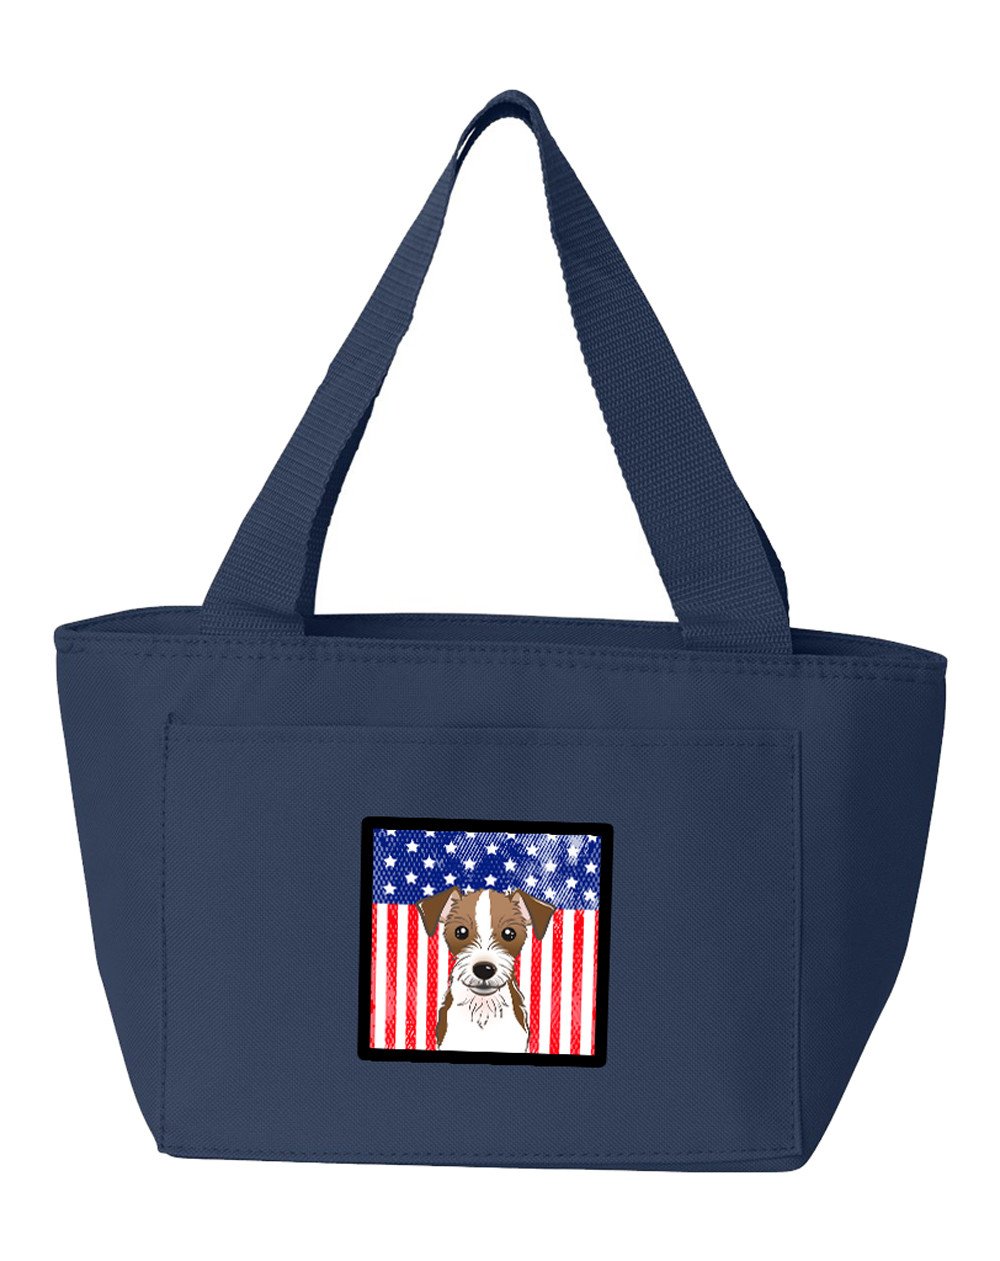 American Flag and Jack Russell Terrier Lunch Bag BB2132NA-8808 by Caroline's Treasures